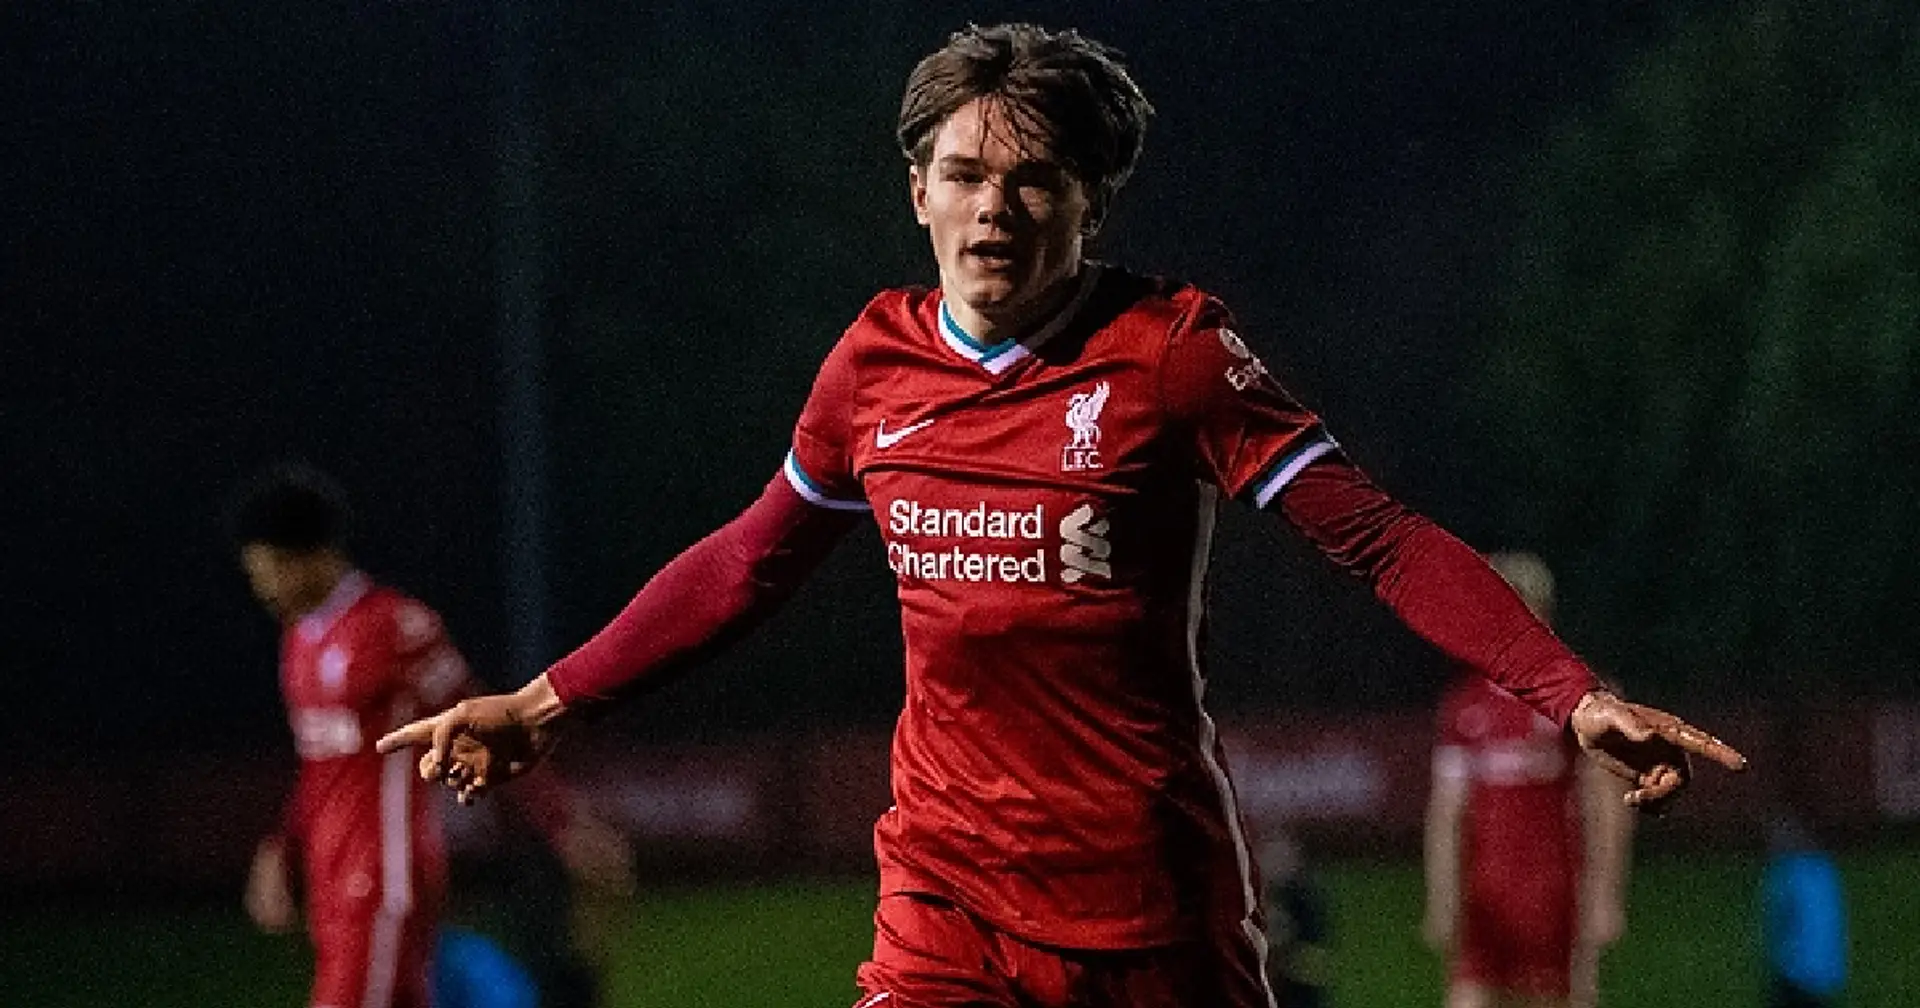 Liverpool FC U18s hammer Sutton United 6-0 to advance in FA Youth Cup